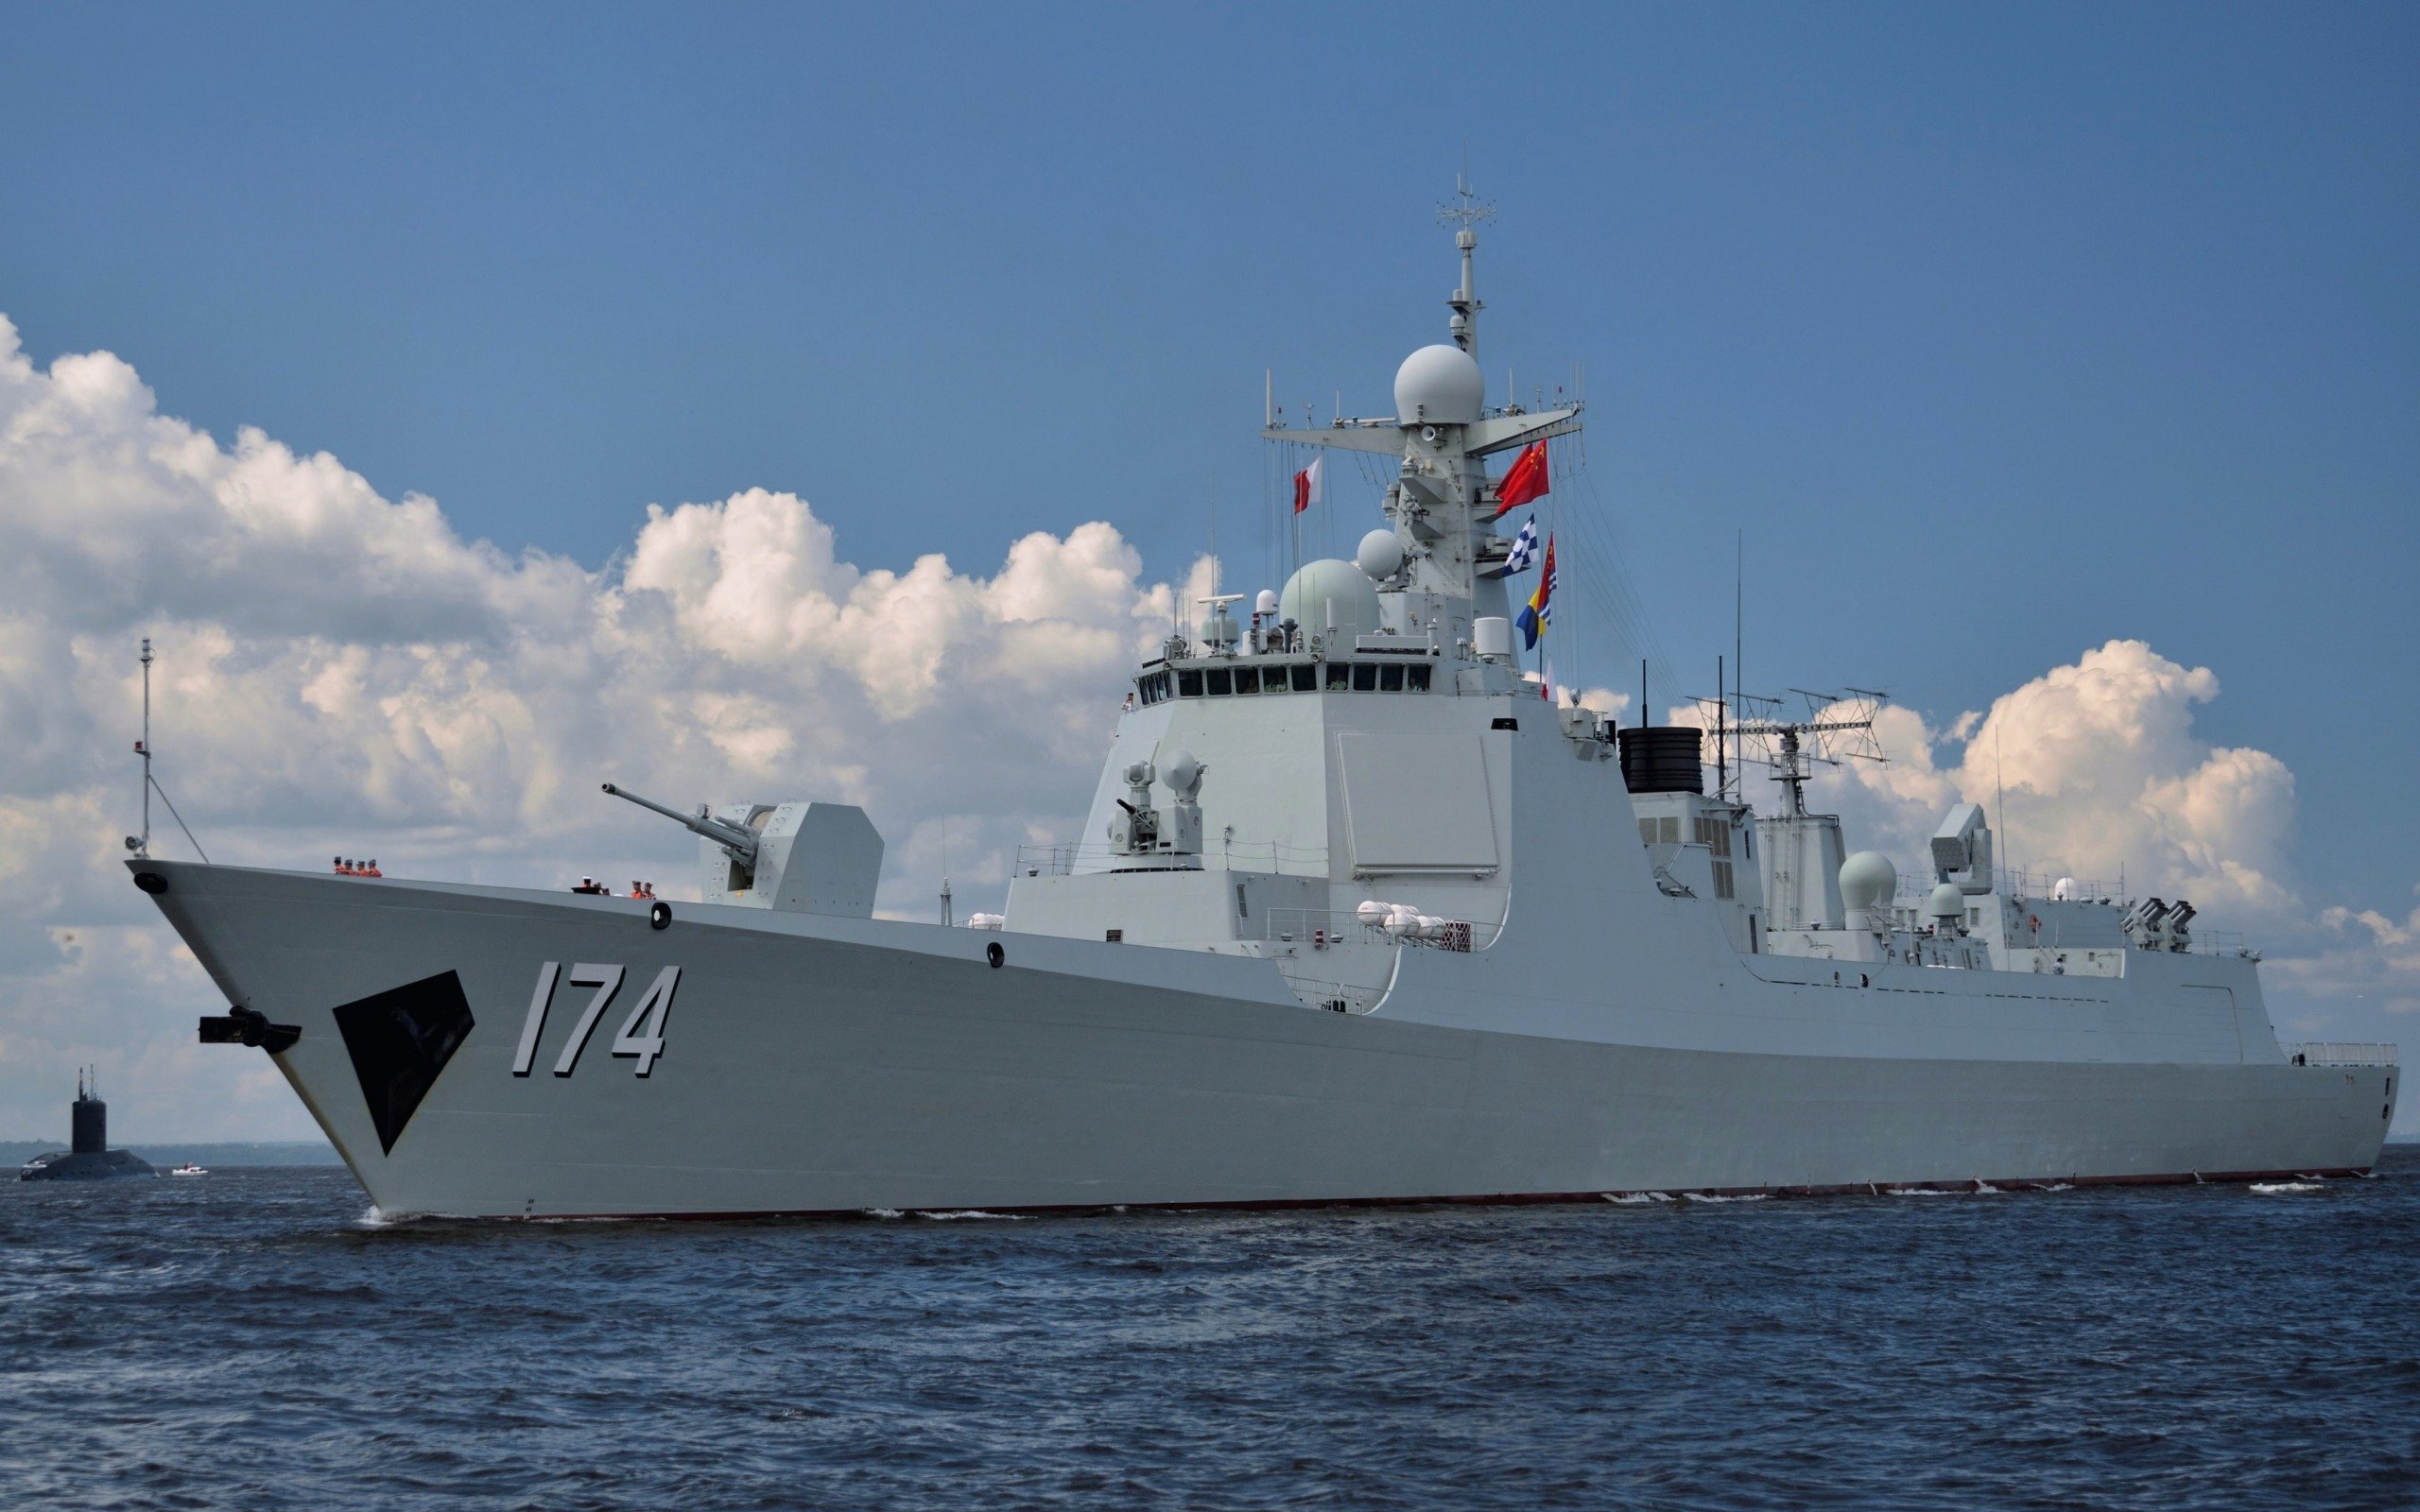 Download wallpapers Chinese destroyer, 052D, Hefei 174, warship ...